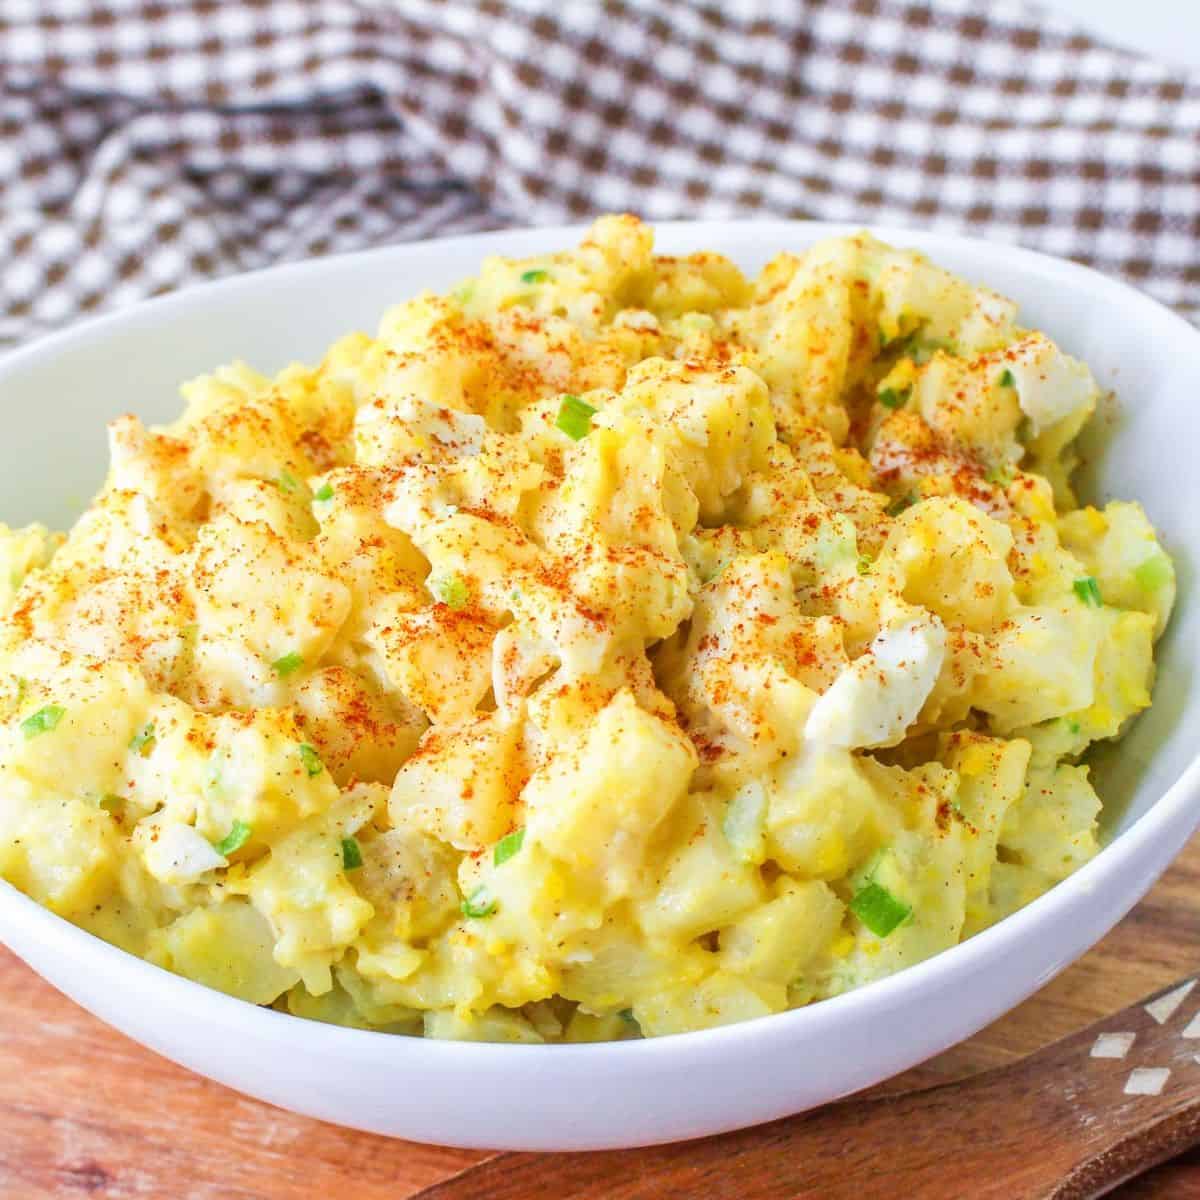 Easy Deviled Egg Potato Salad recipe, a delicious twist  on a popular recipe, featuring  the bold taste of seasoned deviled eggs with potatoes.